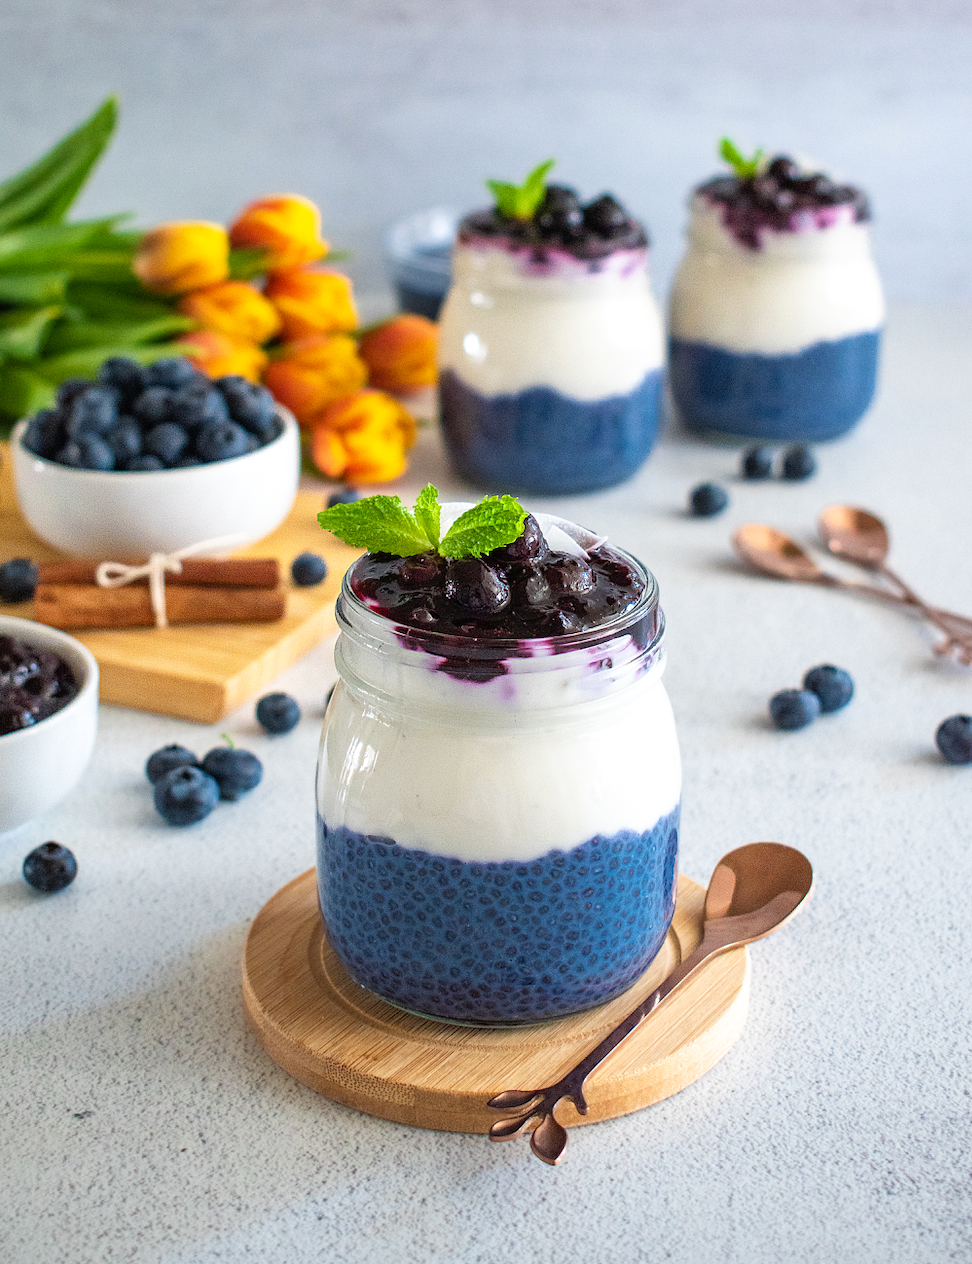 Easy Chia Pudding with Blueberry Compote (Vegan, Dairy-Free)